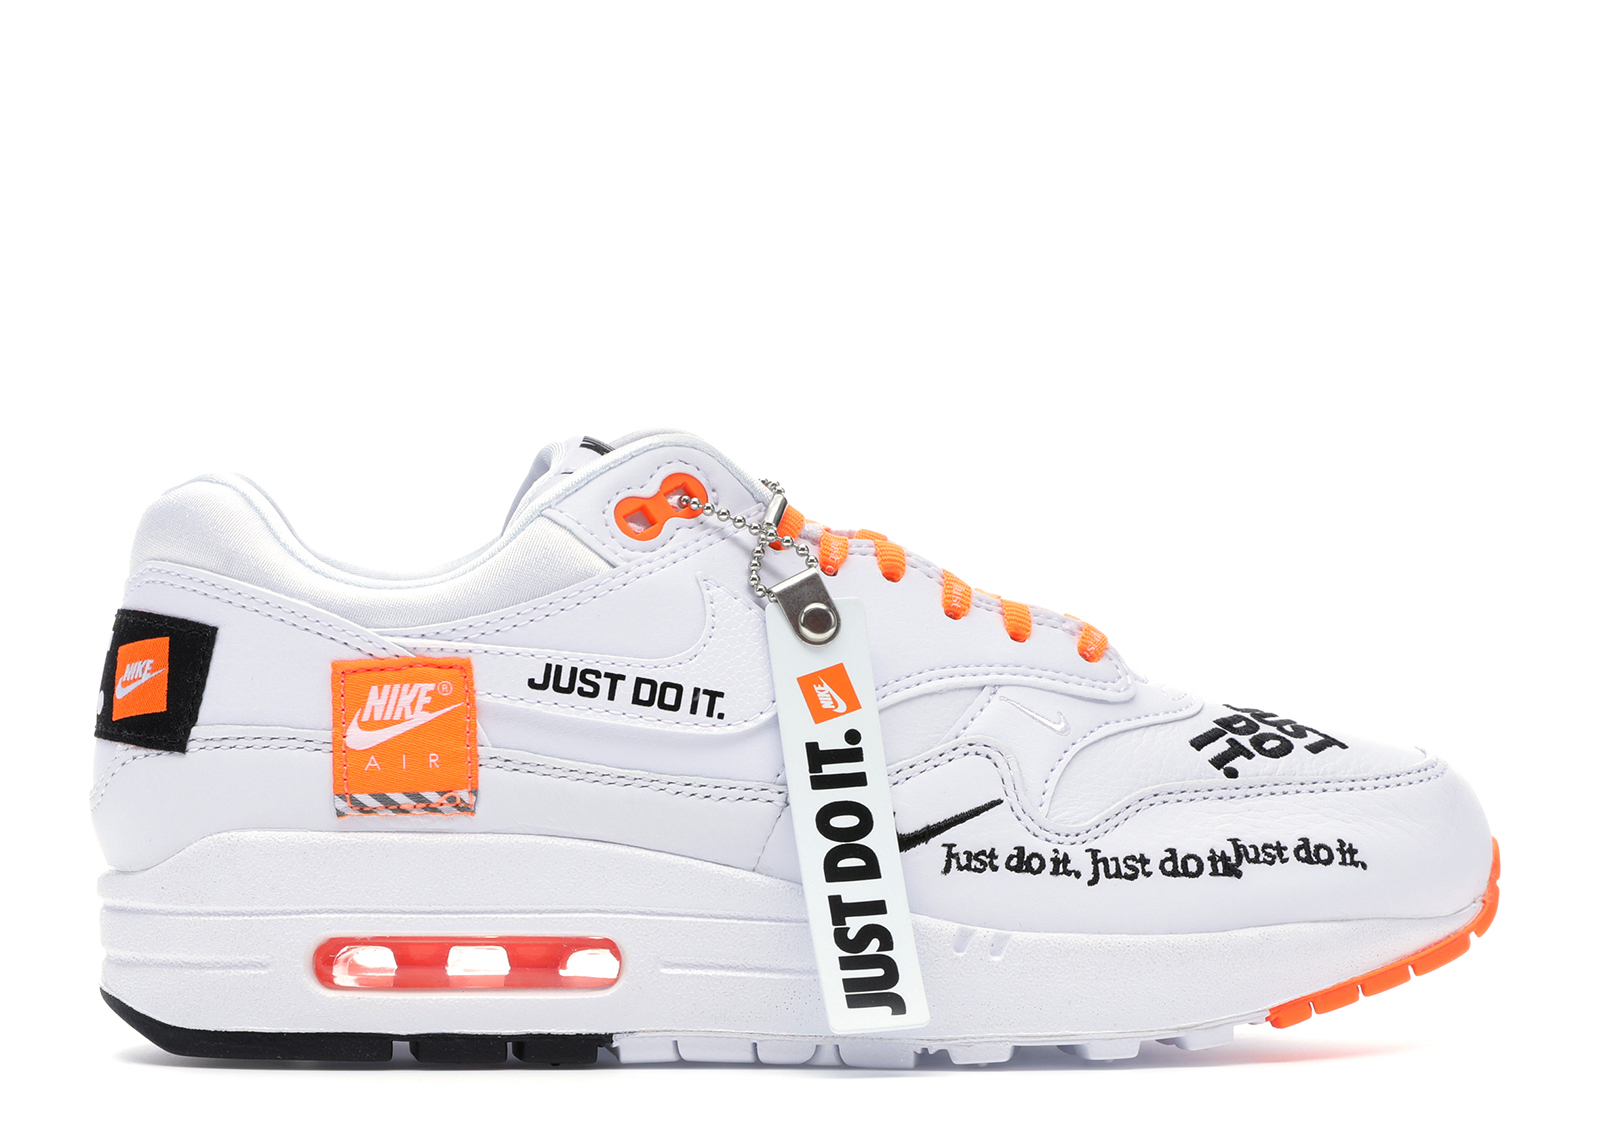 Nike Air Max 1 Just Do It White (Women's) - 917691-100 - US